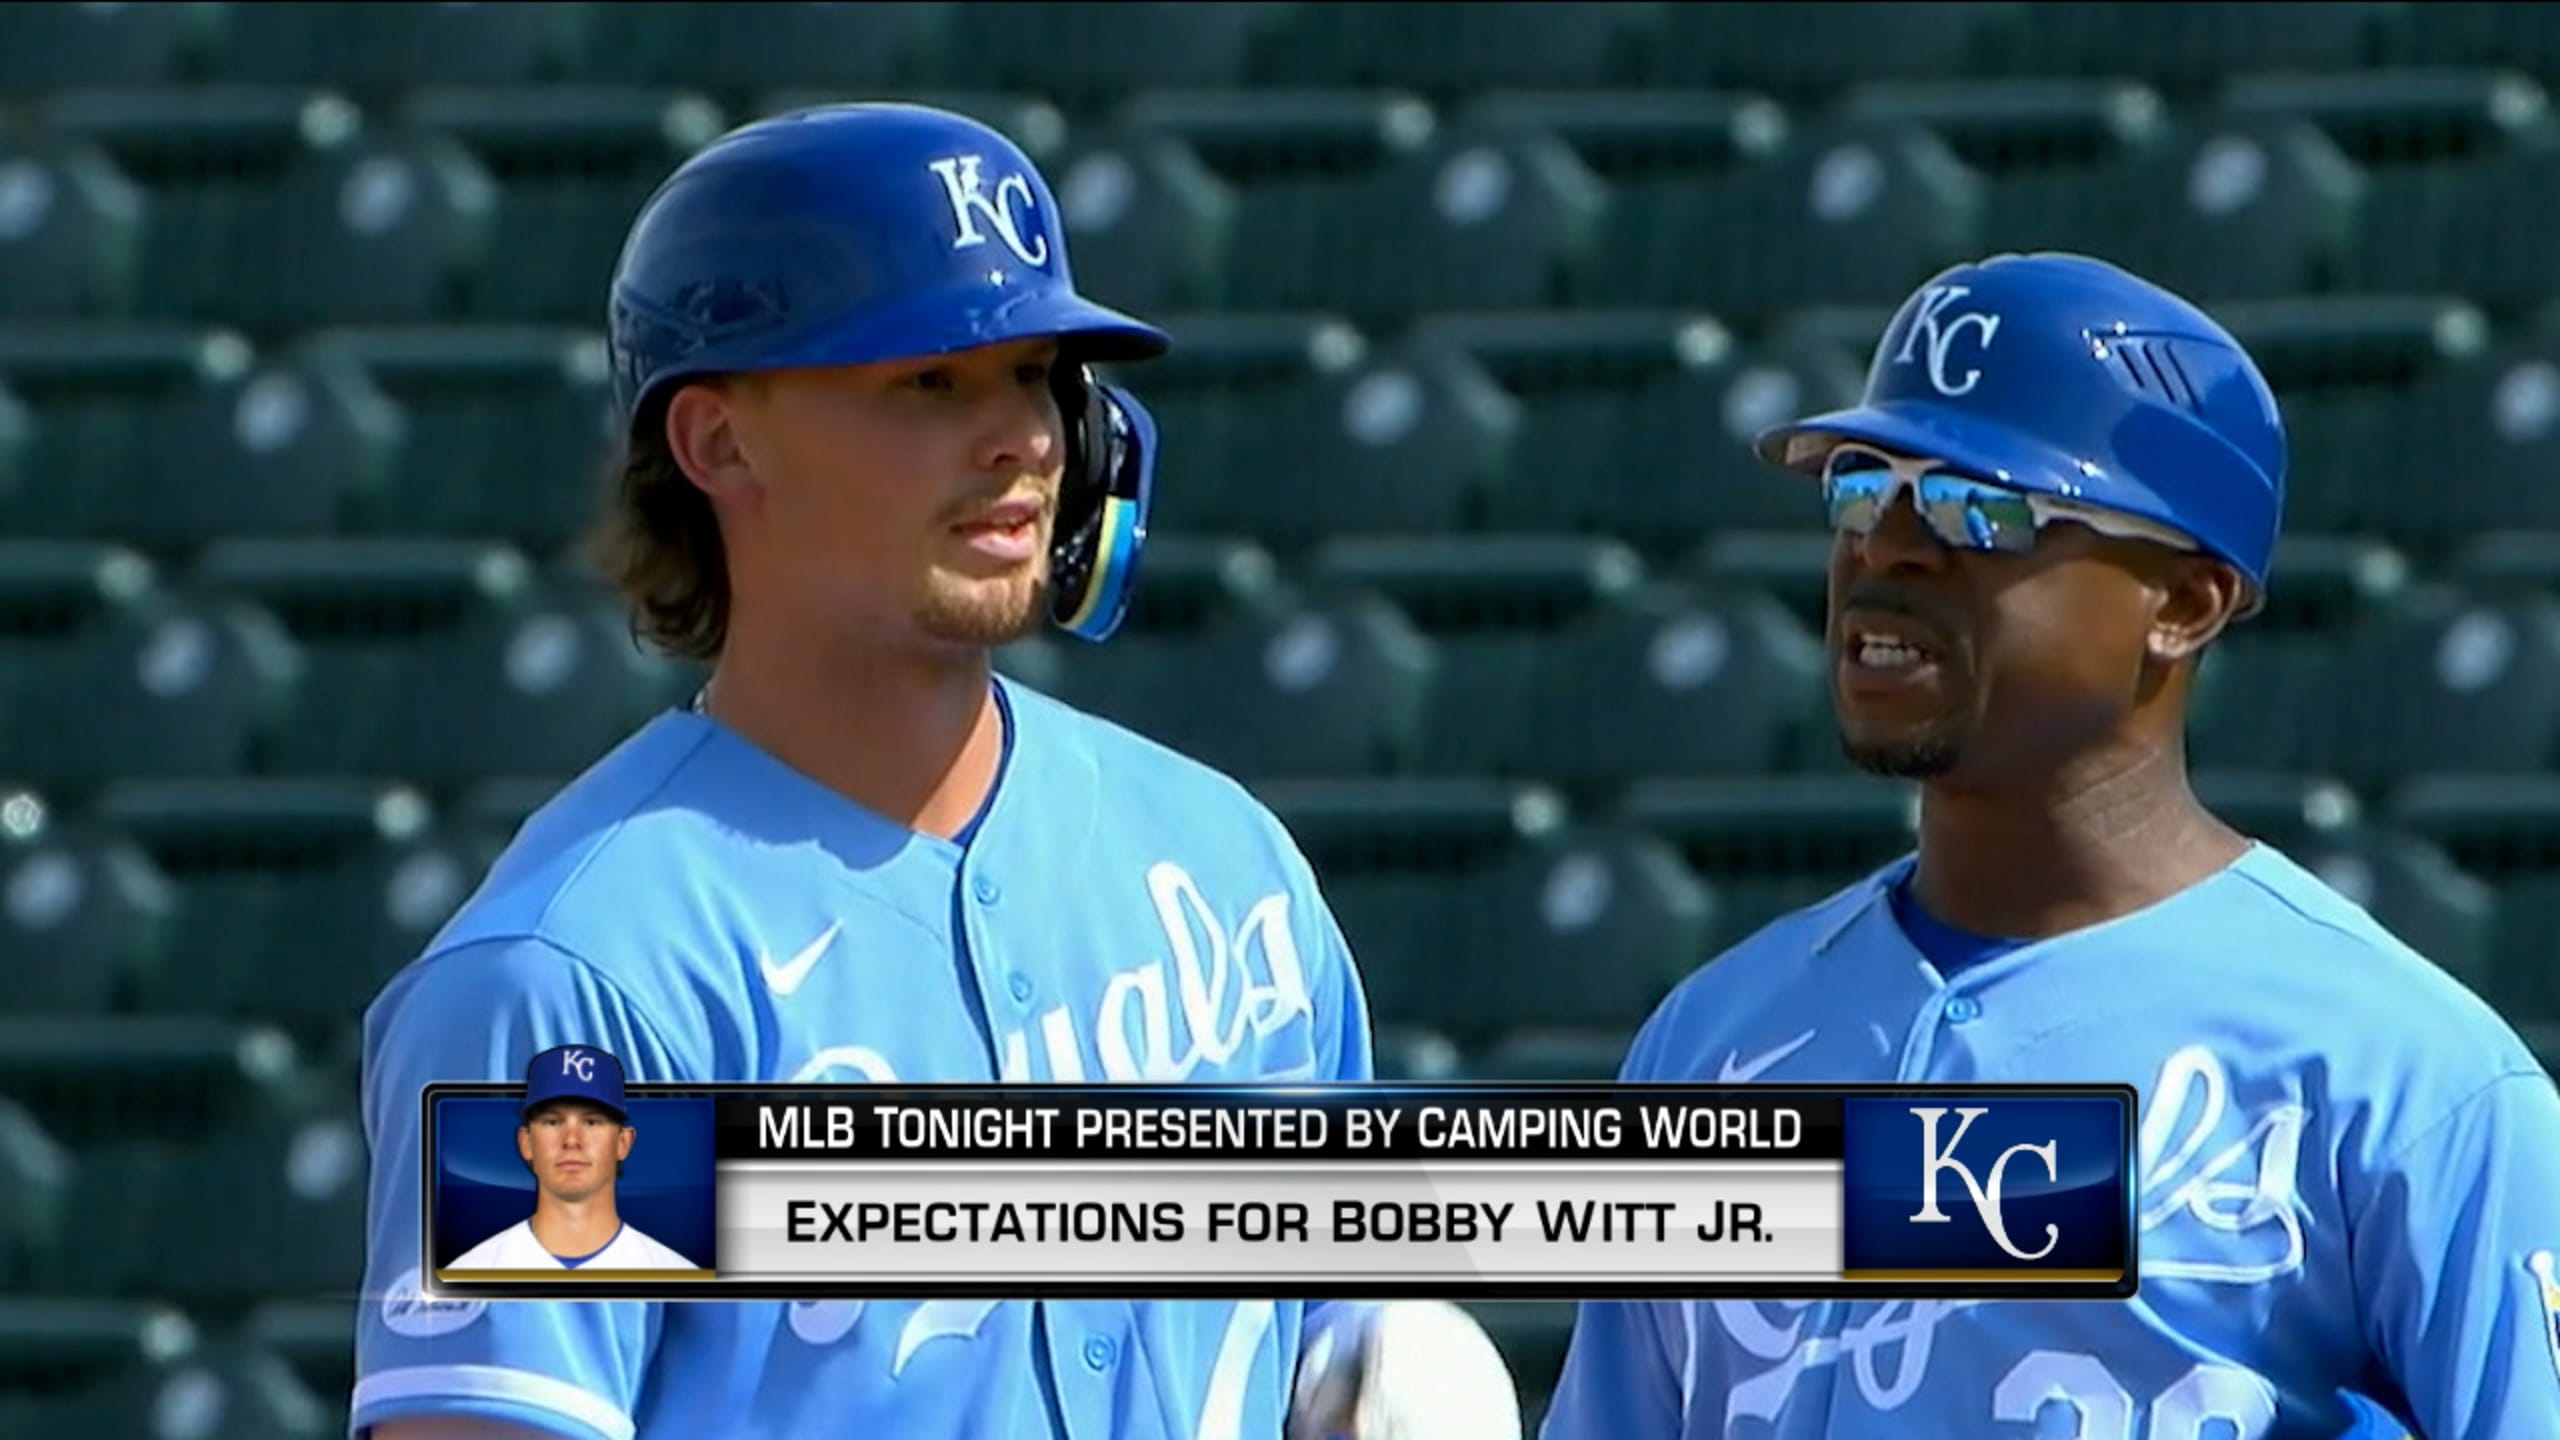 KC Royals Opening Day: Prospect Bobby Witt Jr. to debut